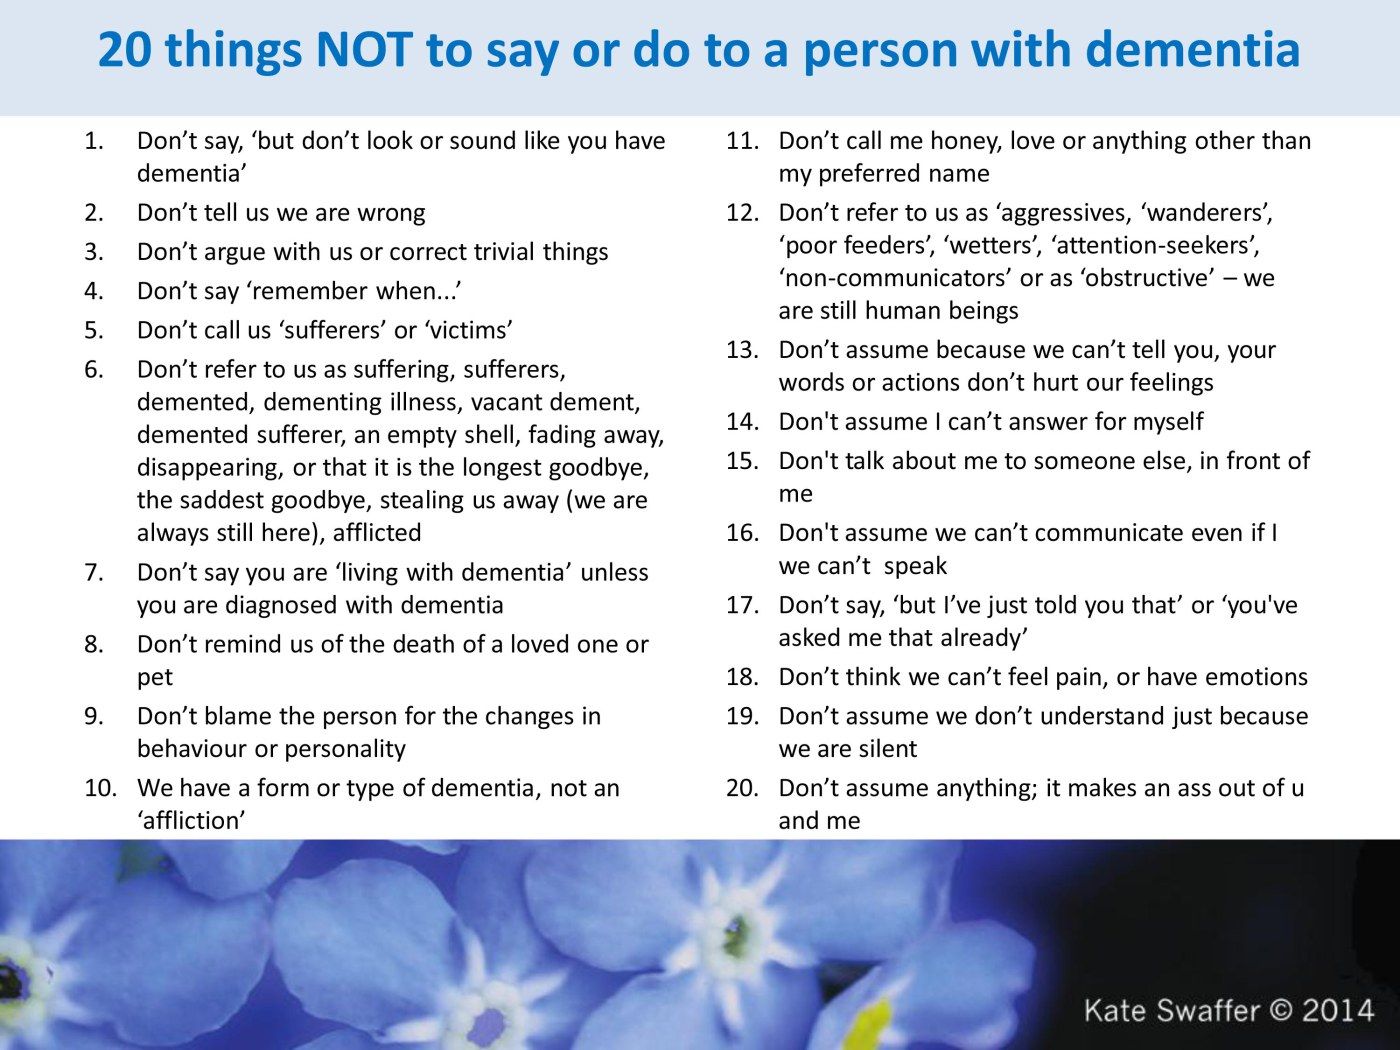 20 things not to say or do to a person with dementia ...